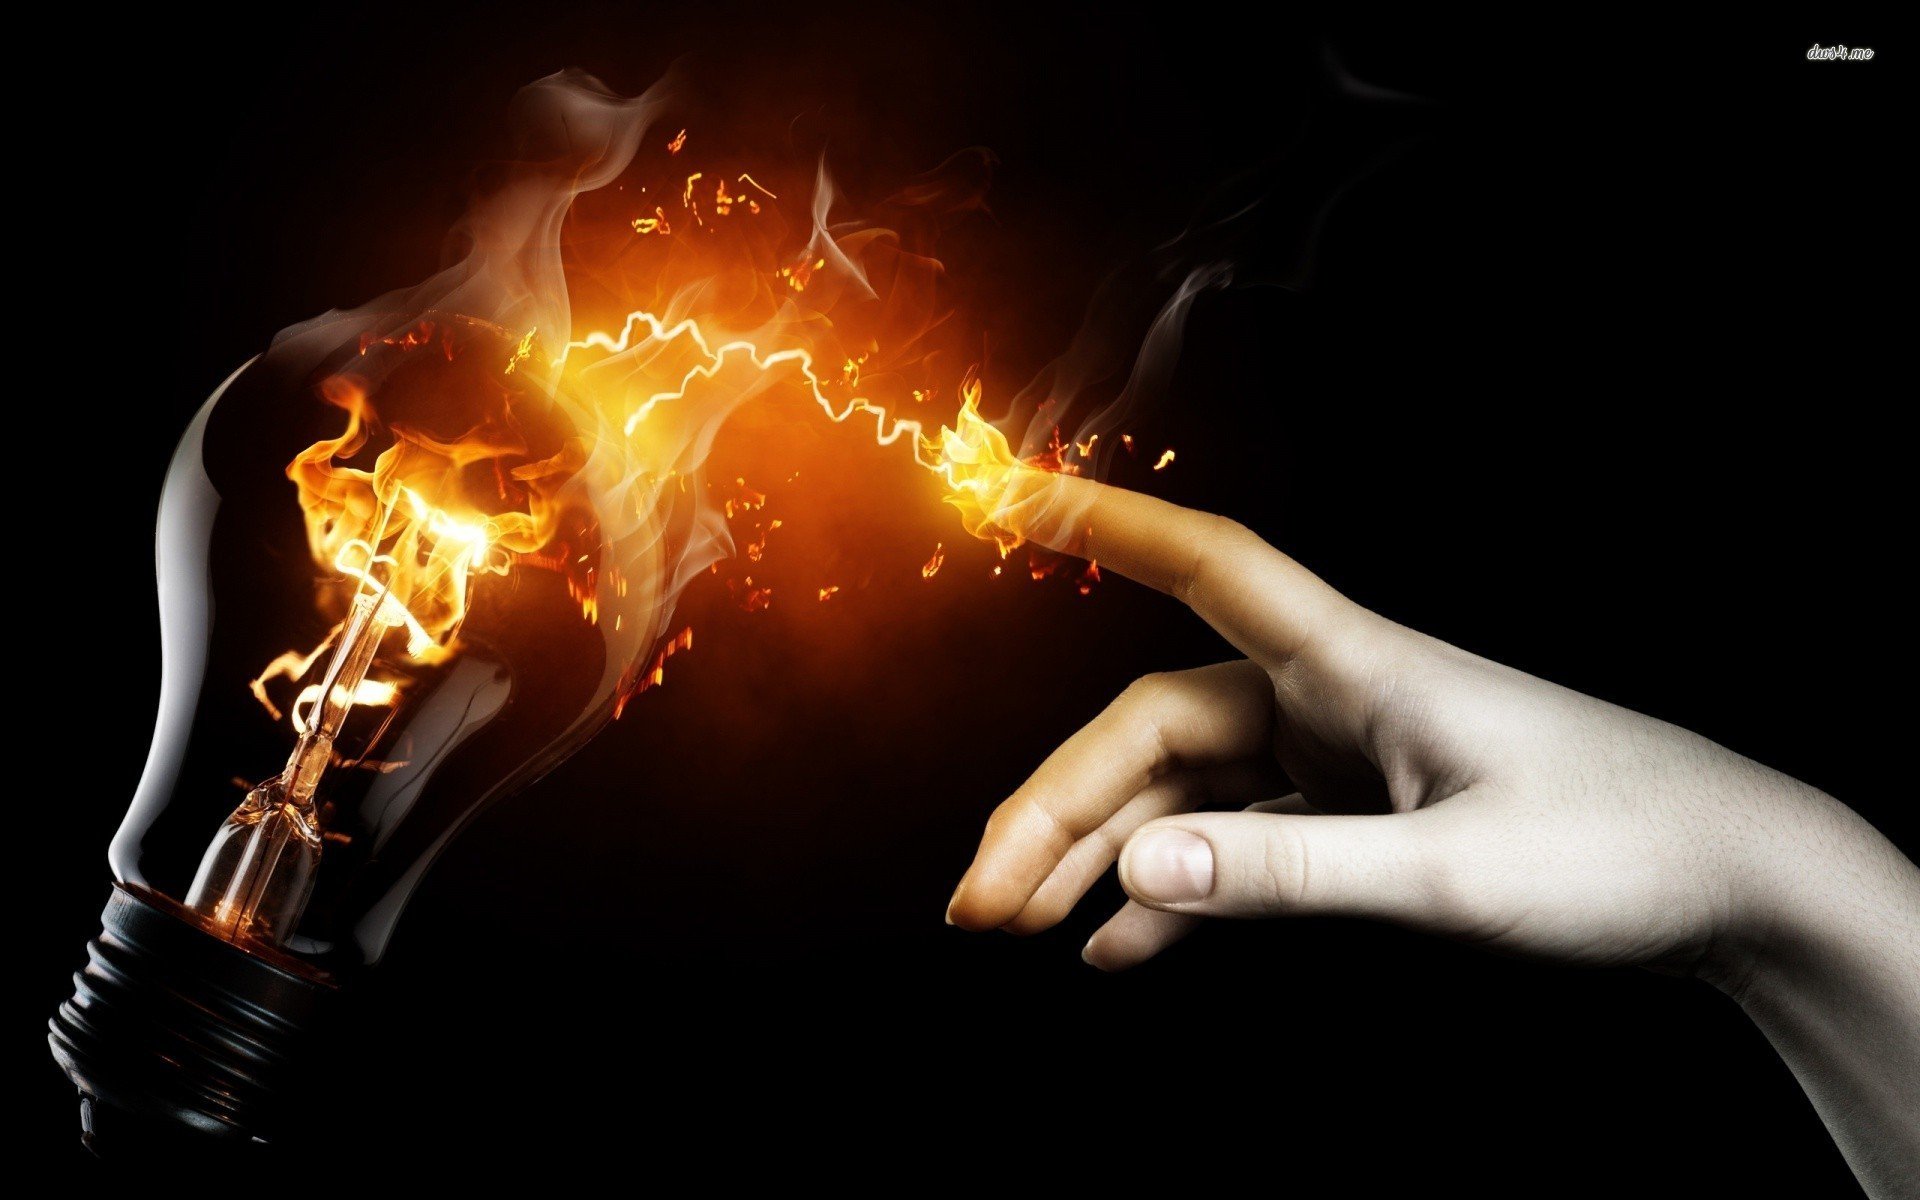 electrical engineering wallpapers hd,flame,fire,heat,hand,smoking